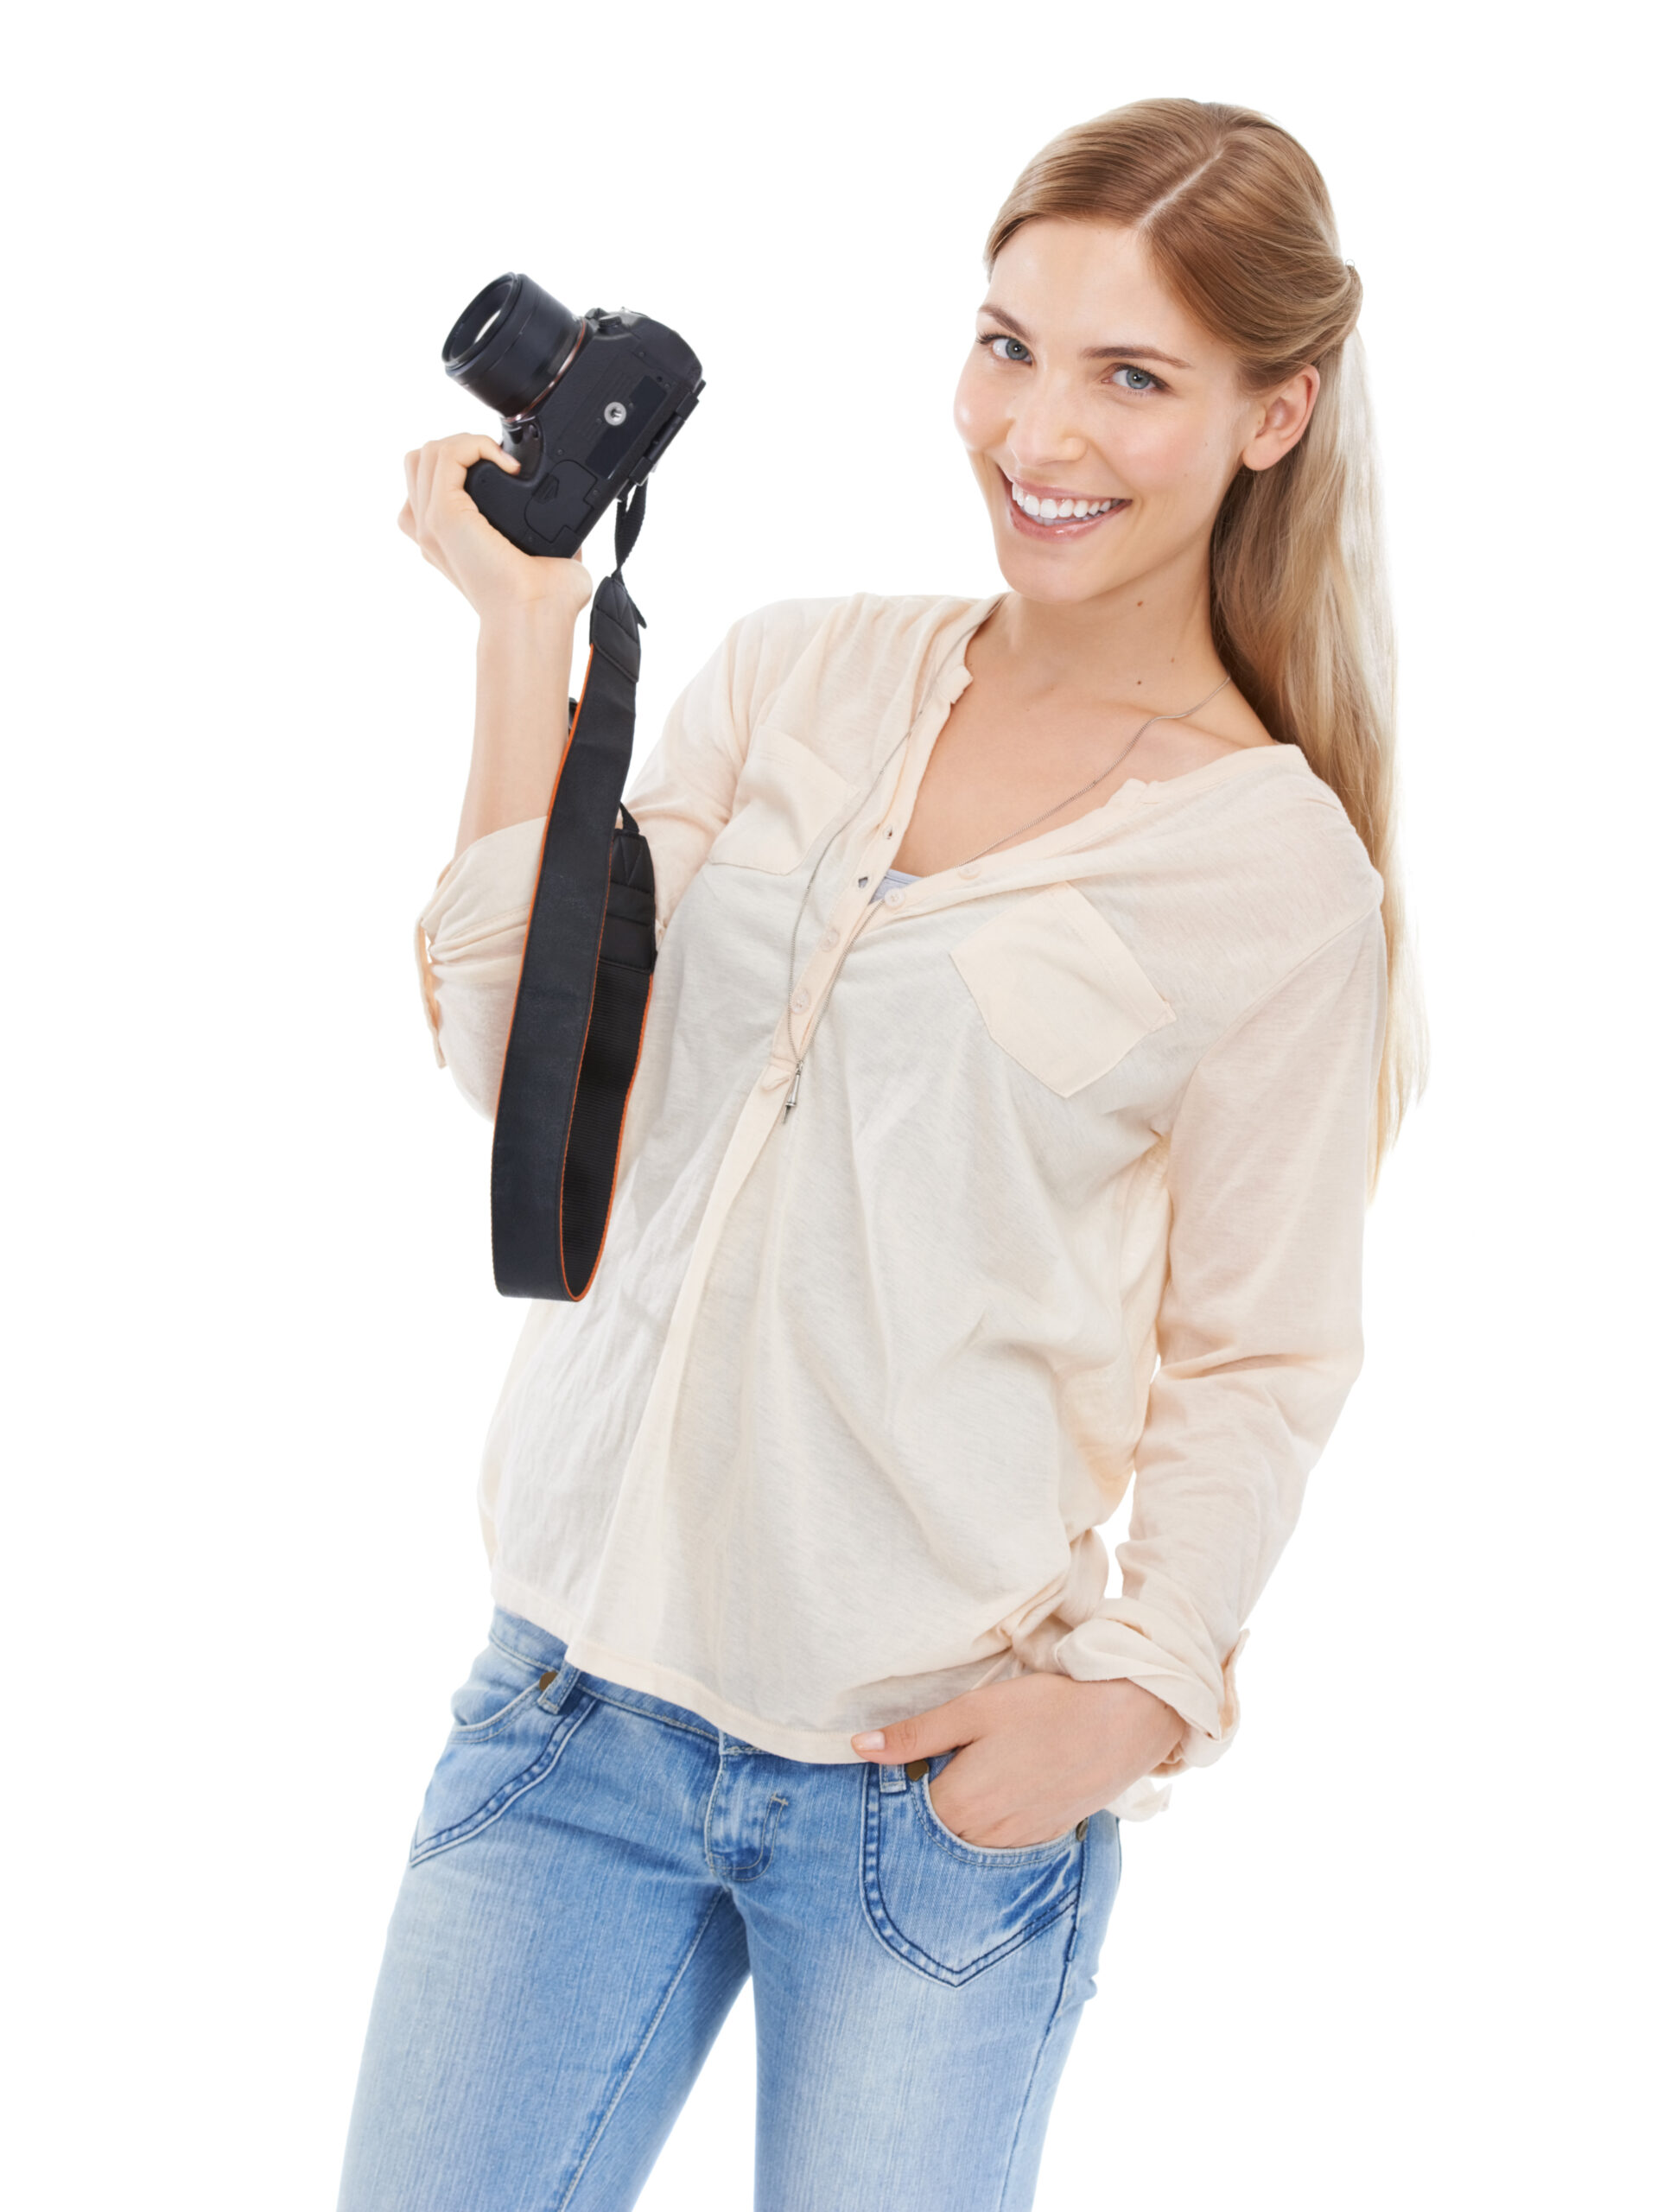 Discover a New Hobby on a River Cruise - Woman Holding a Camera